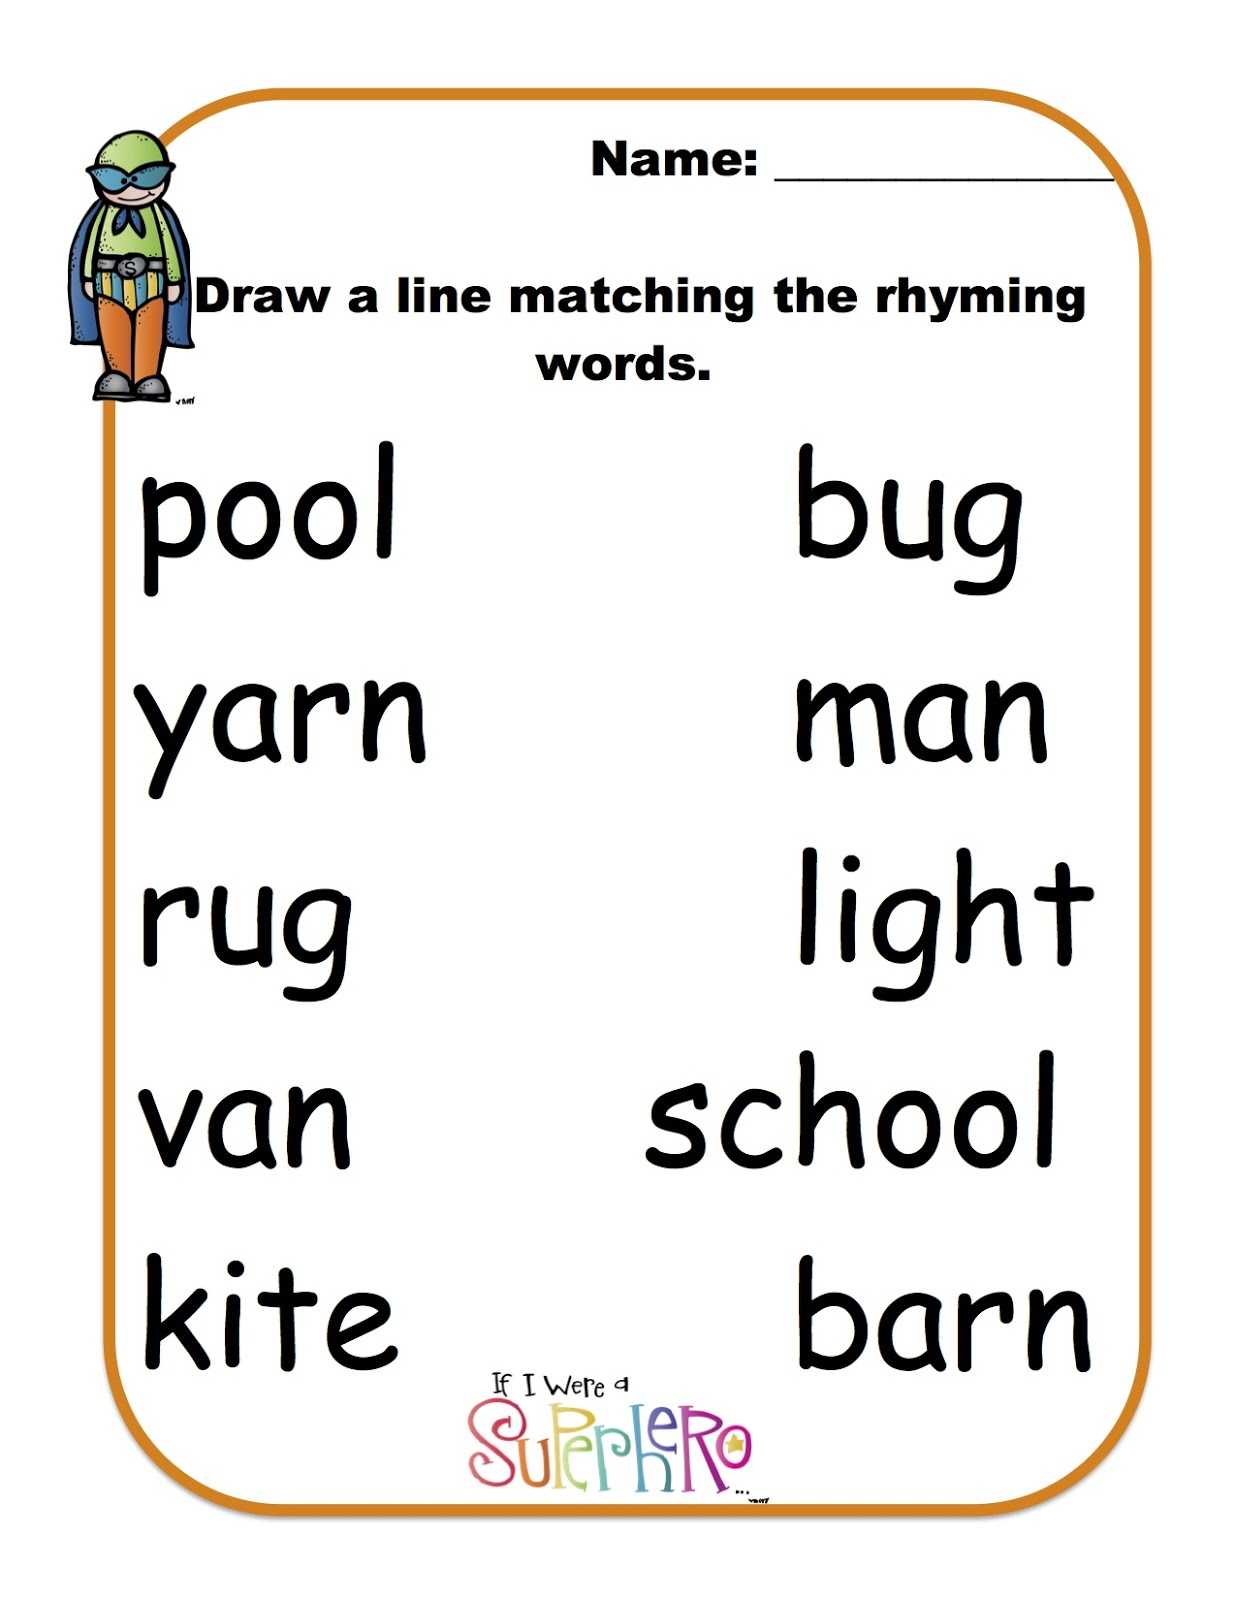 Solving Proportions Worksheet Answers and Rhyming Words Worksheet Year 4 Kidz Activities